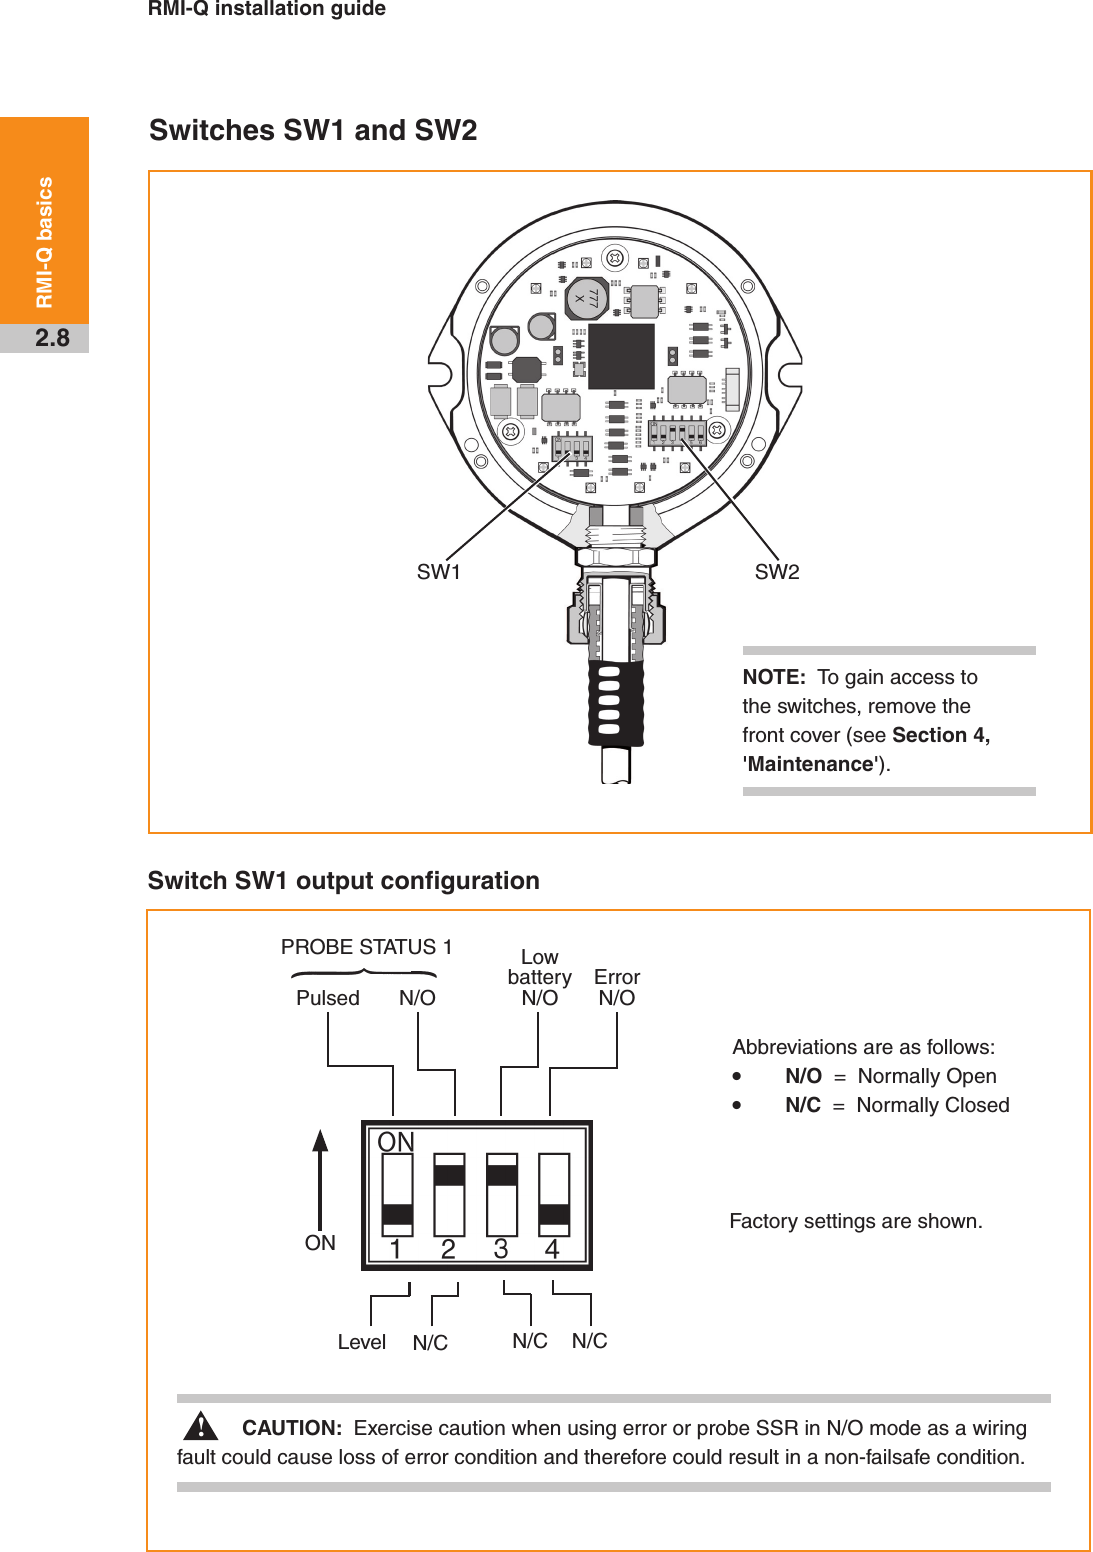 RMI-Q installation guide2.8RMI-Q basicsSwitches SW1 and SW2Switch SW1 output configurationSW1 SW2NOTE:  To gain access to the switches, remove the front cover (see Section 4, &apos;Maintenance&apos;).Factory settings are shown.Pulsed N/OPROBE STATUS 1 Low battery N/OError N/ON/CN/CN/CLevelONCAUTION:  Exercise caution when using error or probe SSR in N/O mode as a wiring fault could cause loss of error condition and therefore could result in a non-failsafe condition. !Abbreviations are as follows:• N/O  =  Normally Open• N/C  =  Normally Closed